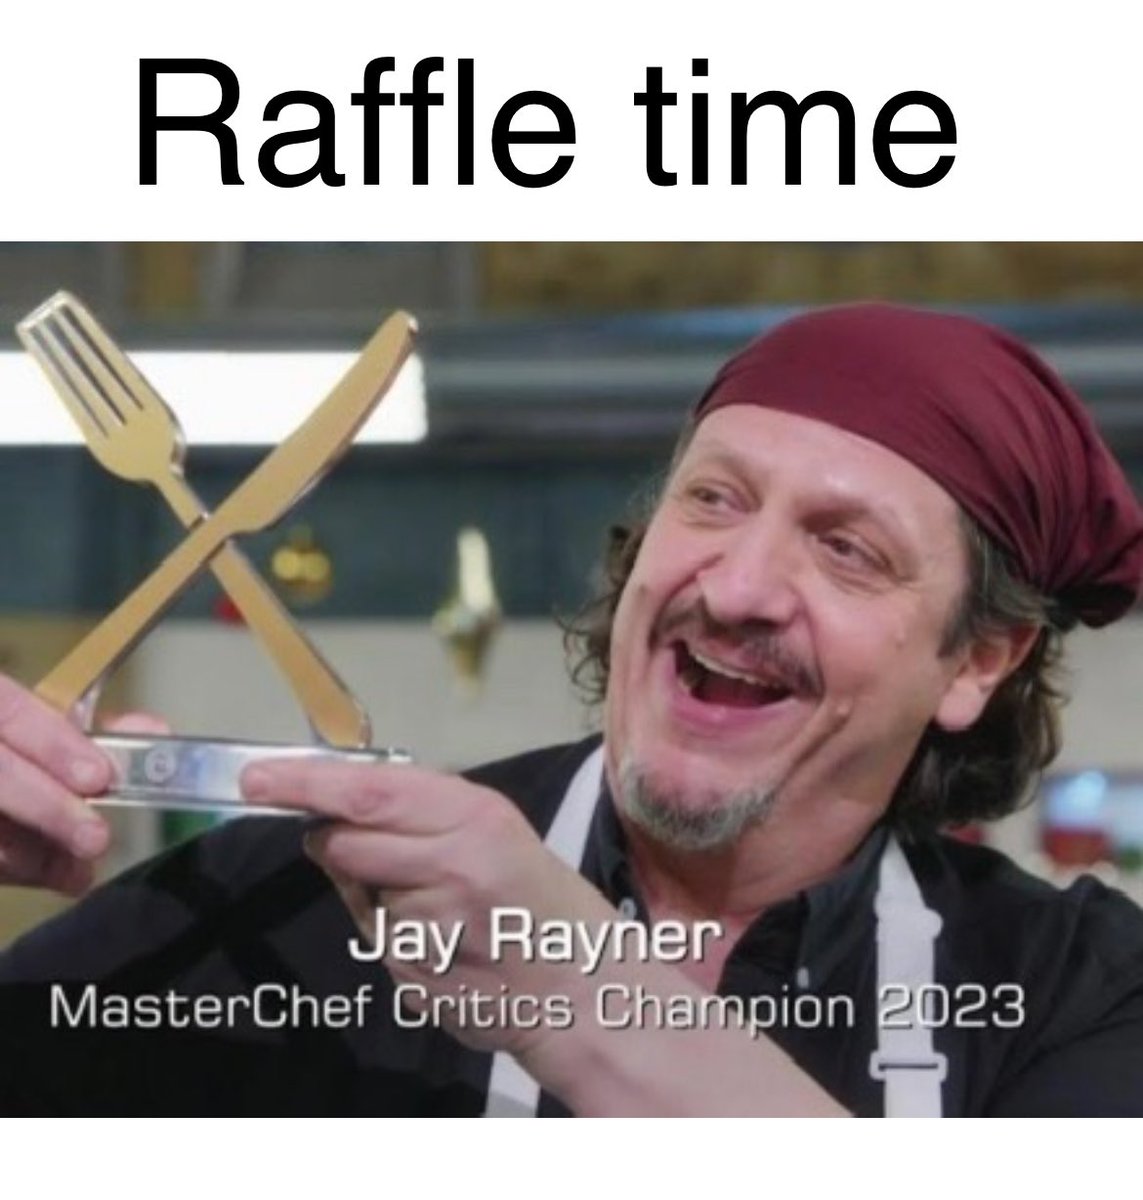 In Feb I auctioned my cooking skills for @TheFoodChain. I would go to the highest bidder’s home and cook my Masterchef winning menu. Some complained it was an elitist way to do it. I listened. So now I’m doing a raffle as well. Details at the link 1/ raffall.com/356739/enter-r….